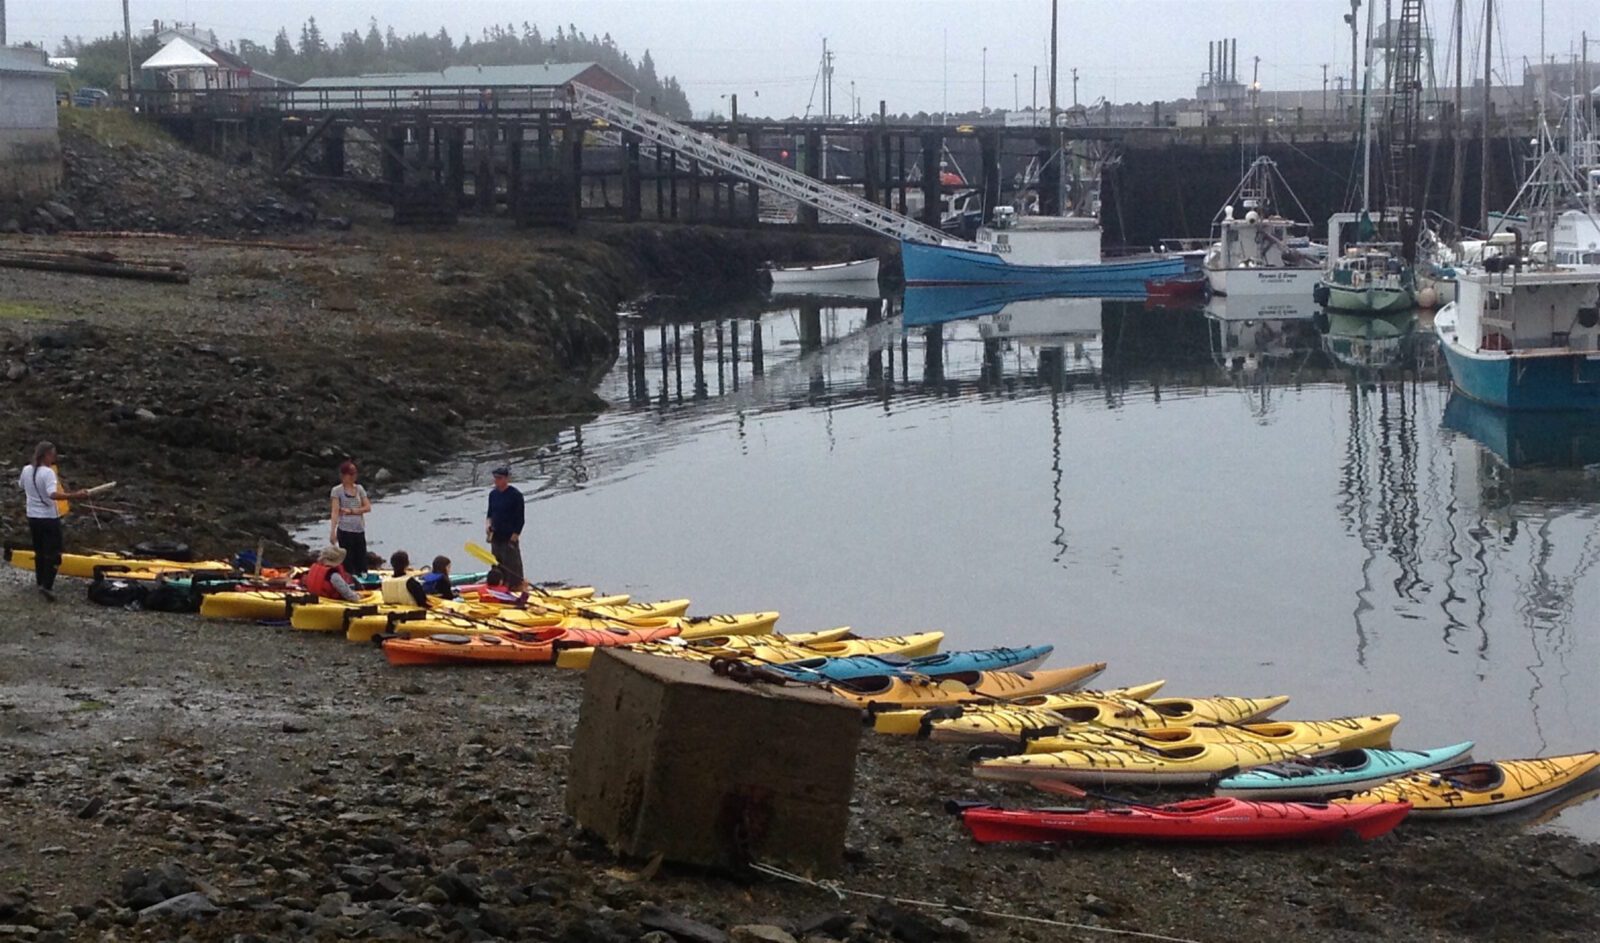 A group of people standing near a dock with kayaks.